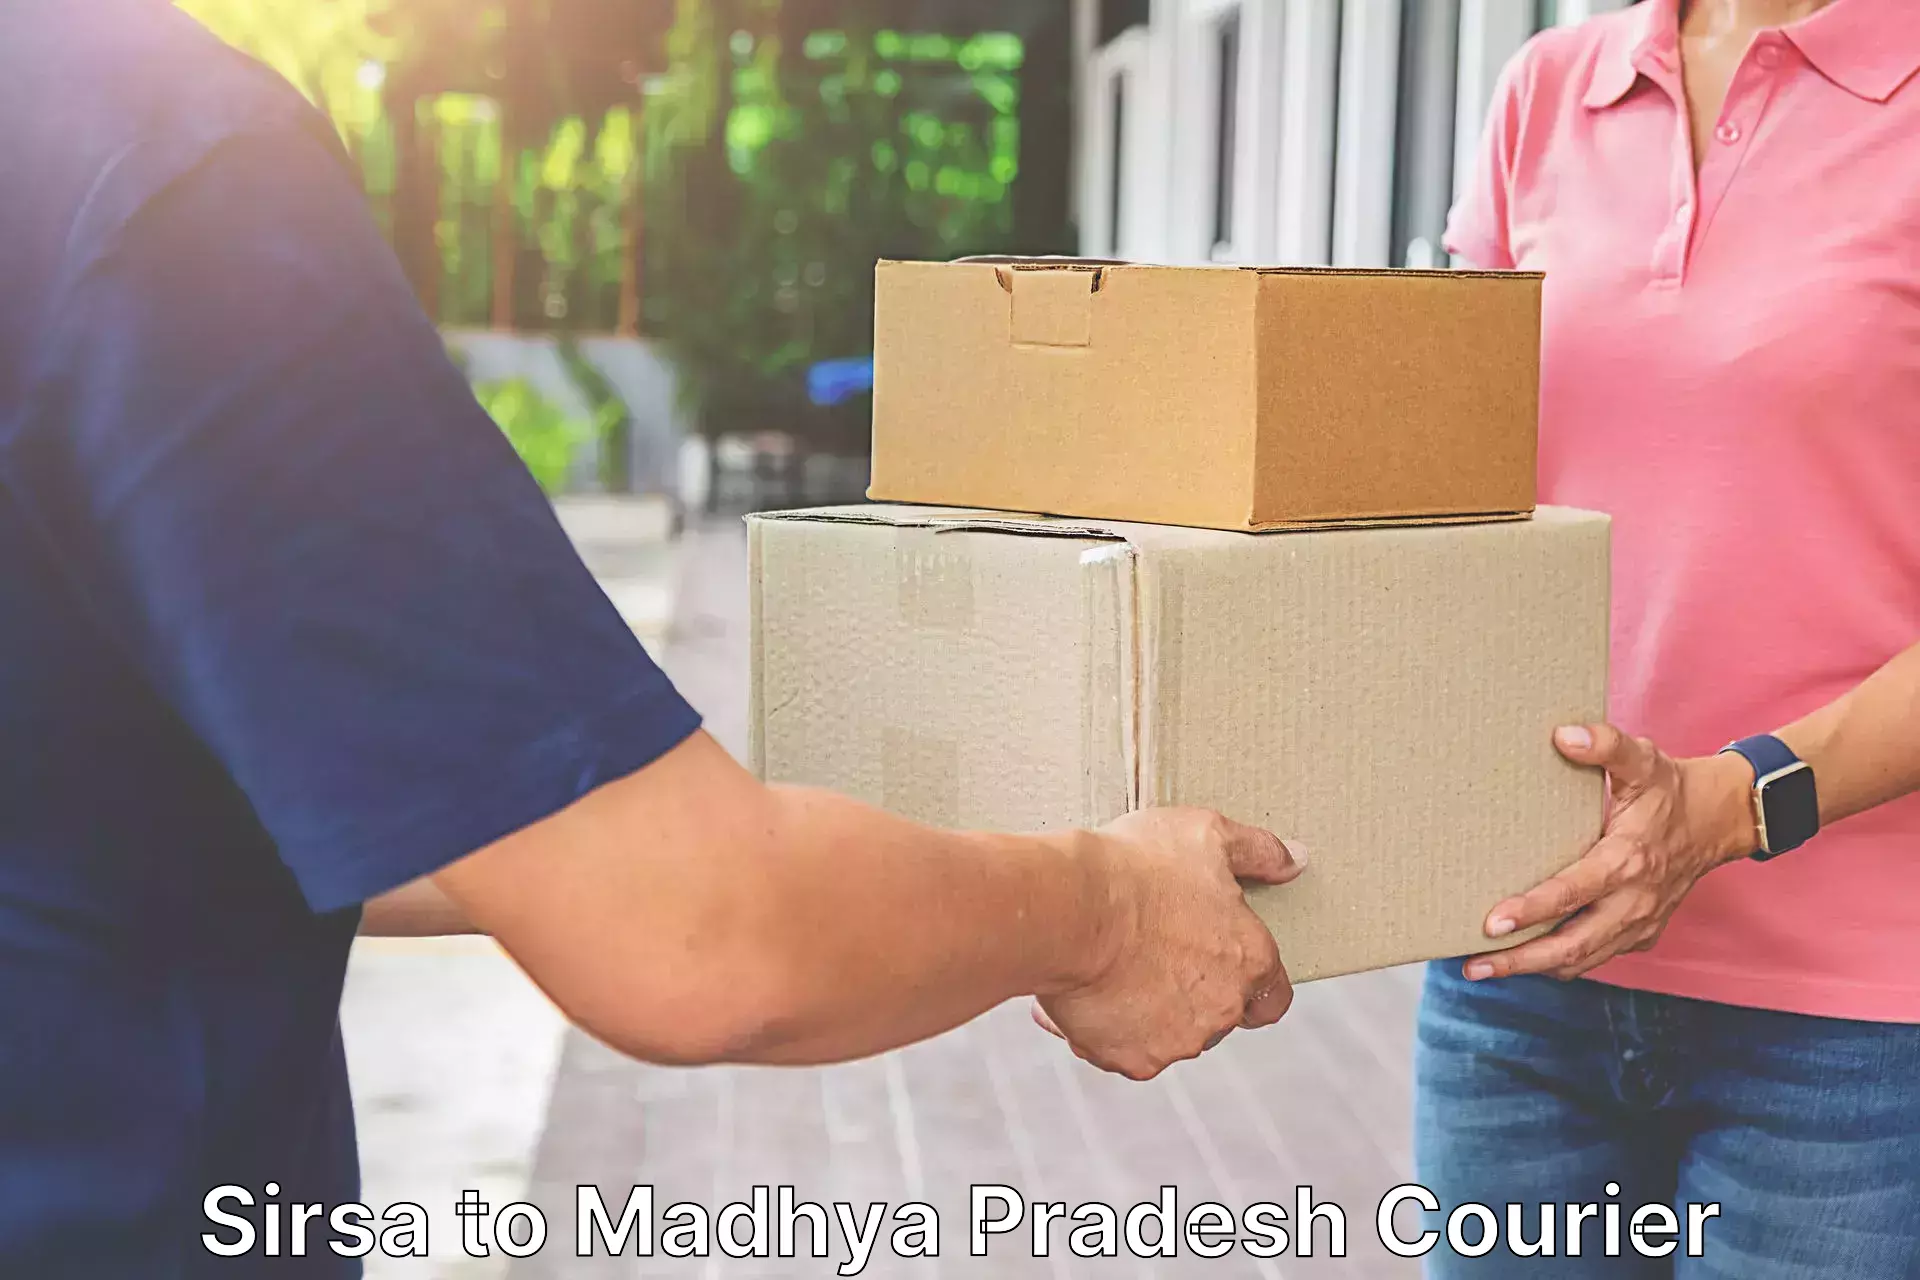 High-quality delivery services Sirsa to IIIT Bhopal